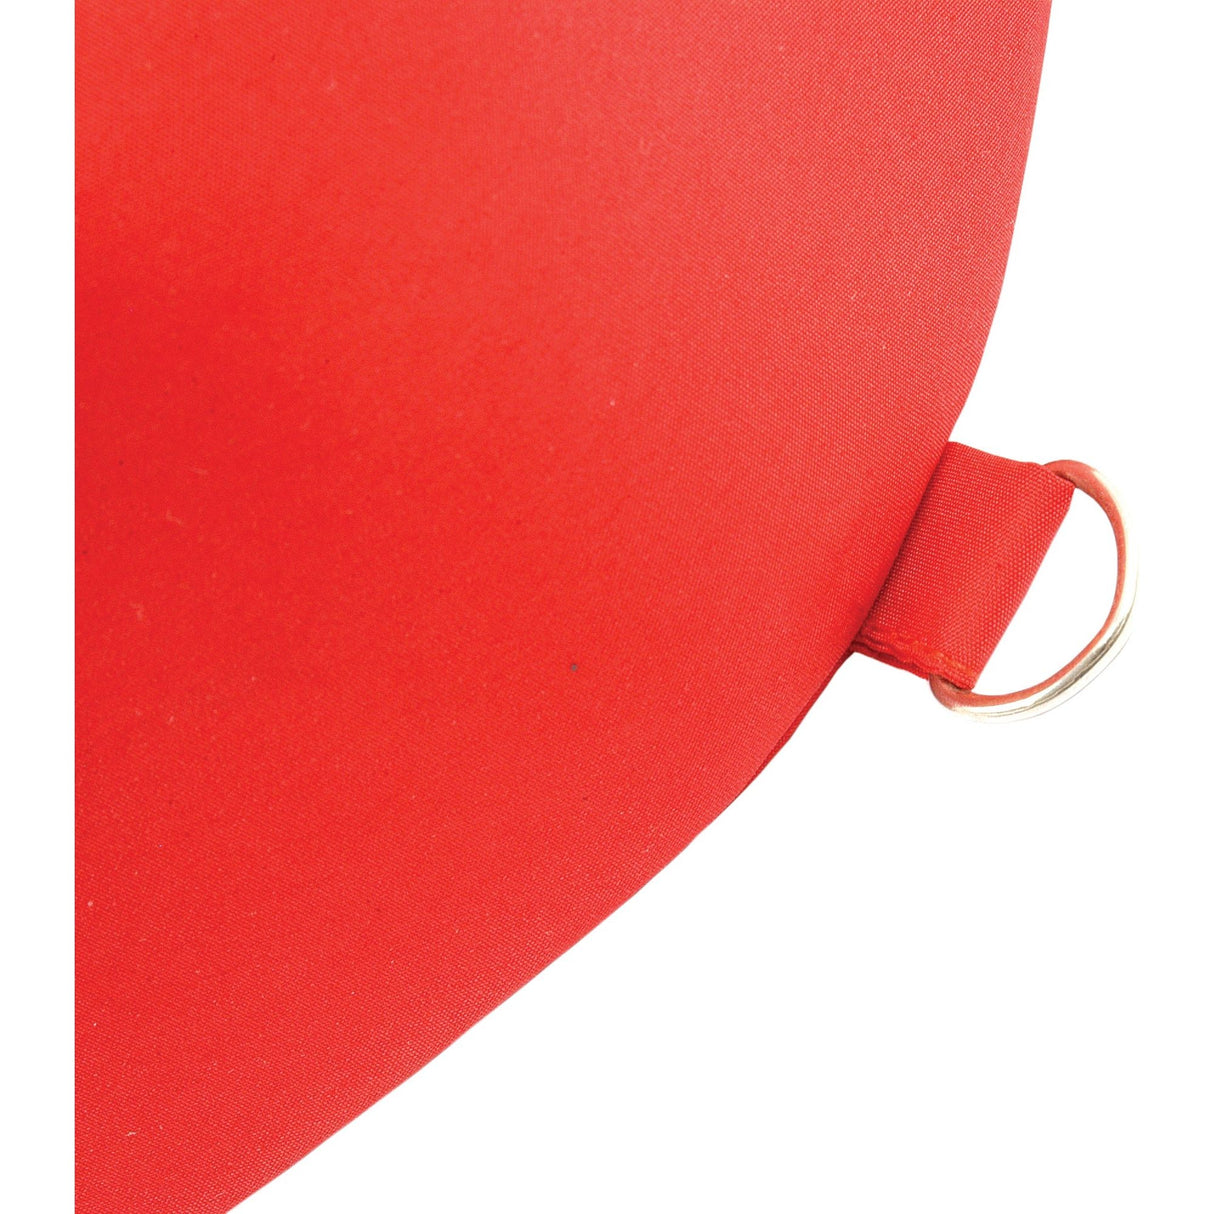 Seat Cushion - Red
 - S.670 - Farming Parts